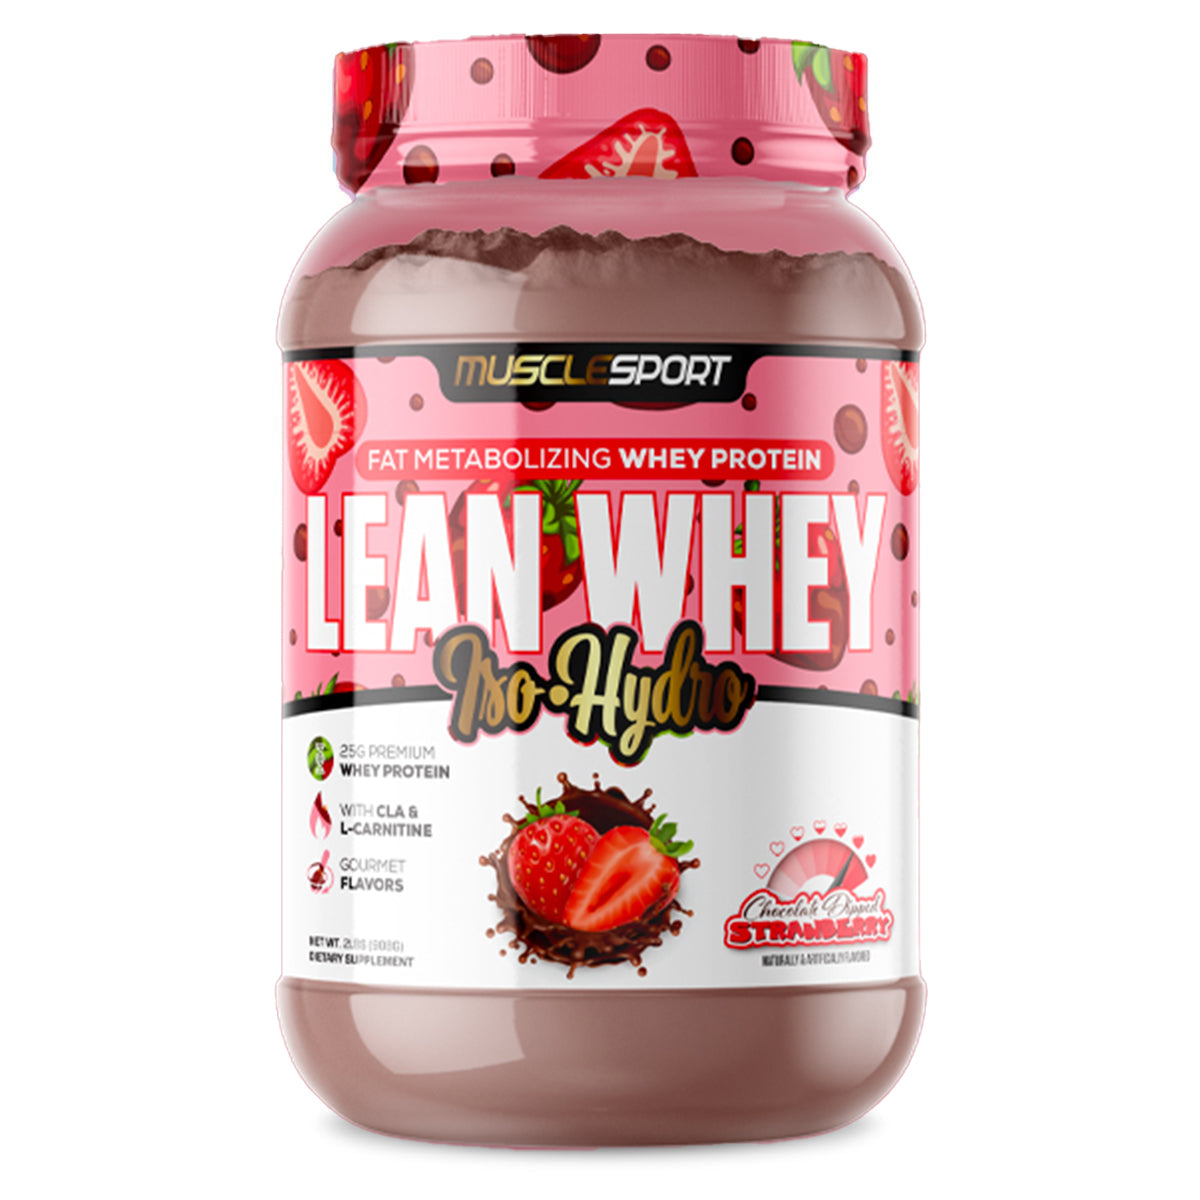 MUSCLESPORT Lean Whey chocolate dipped strawberry flavor bottle